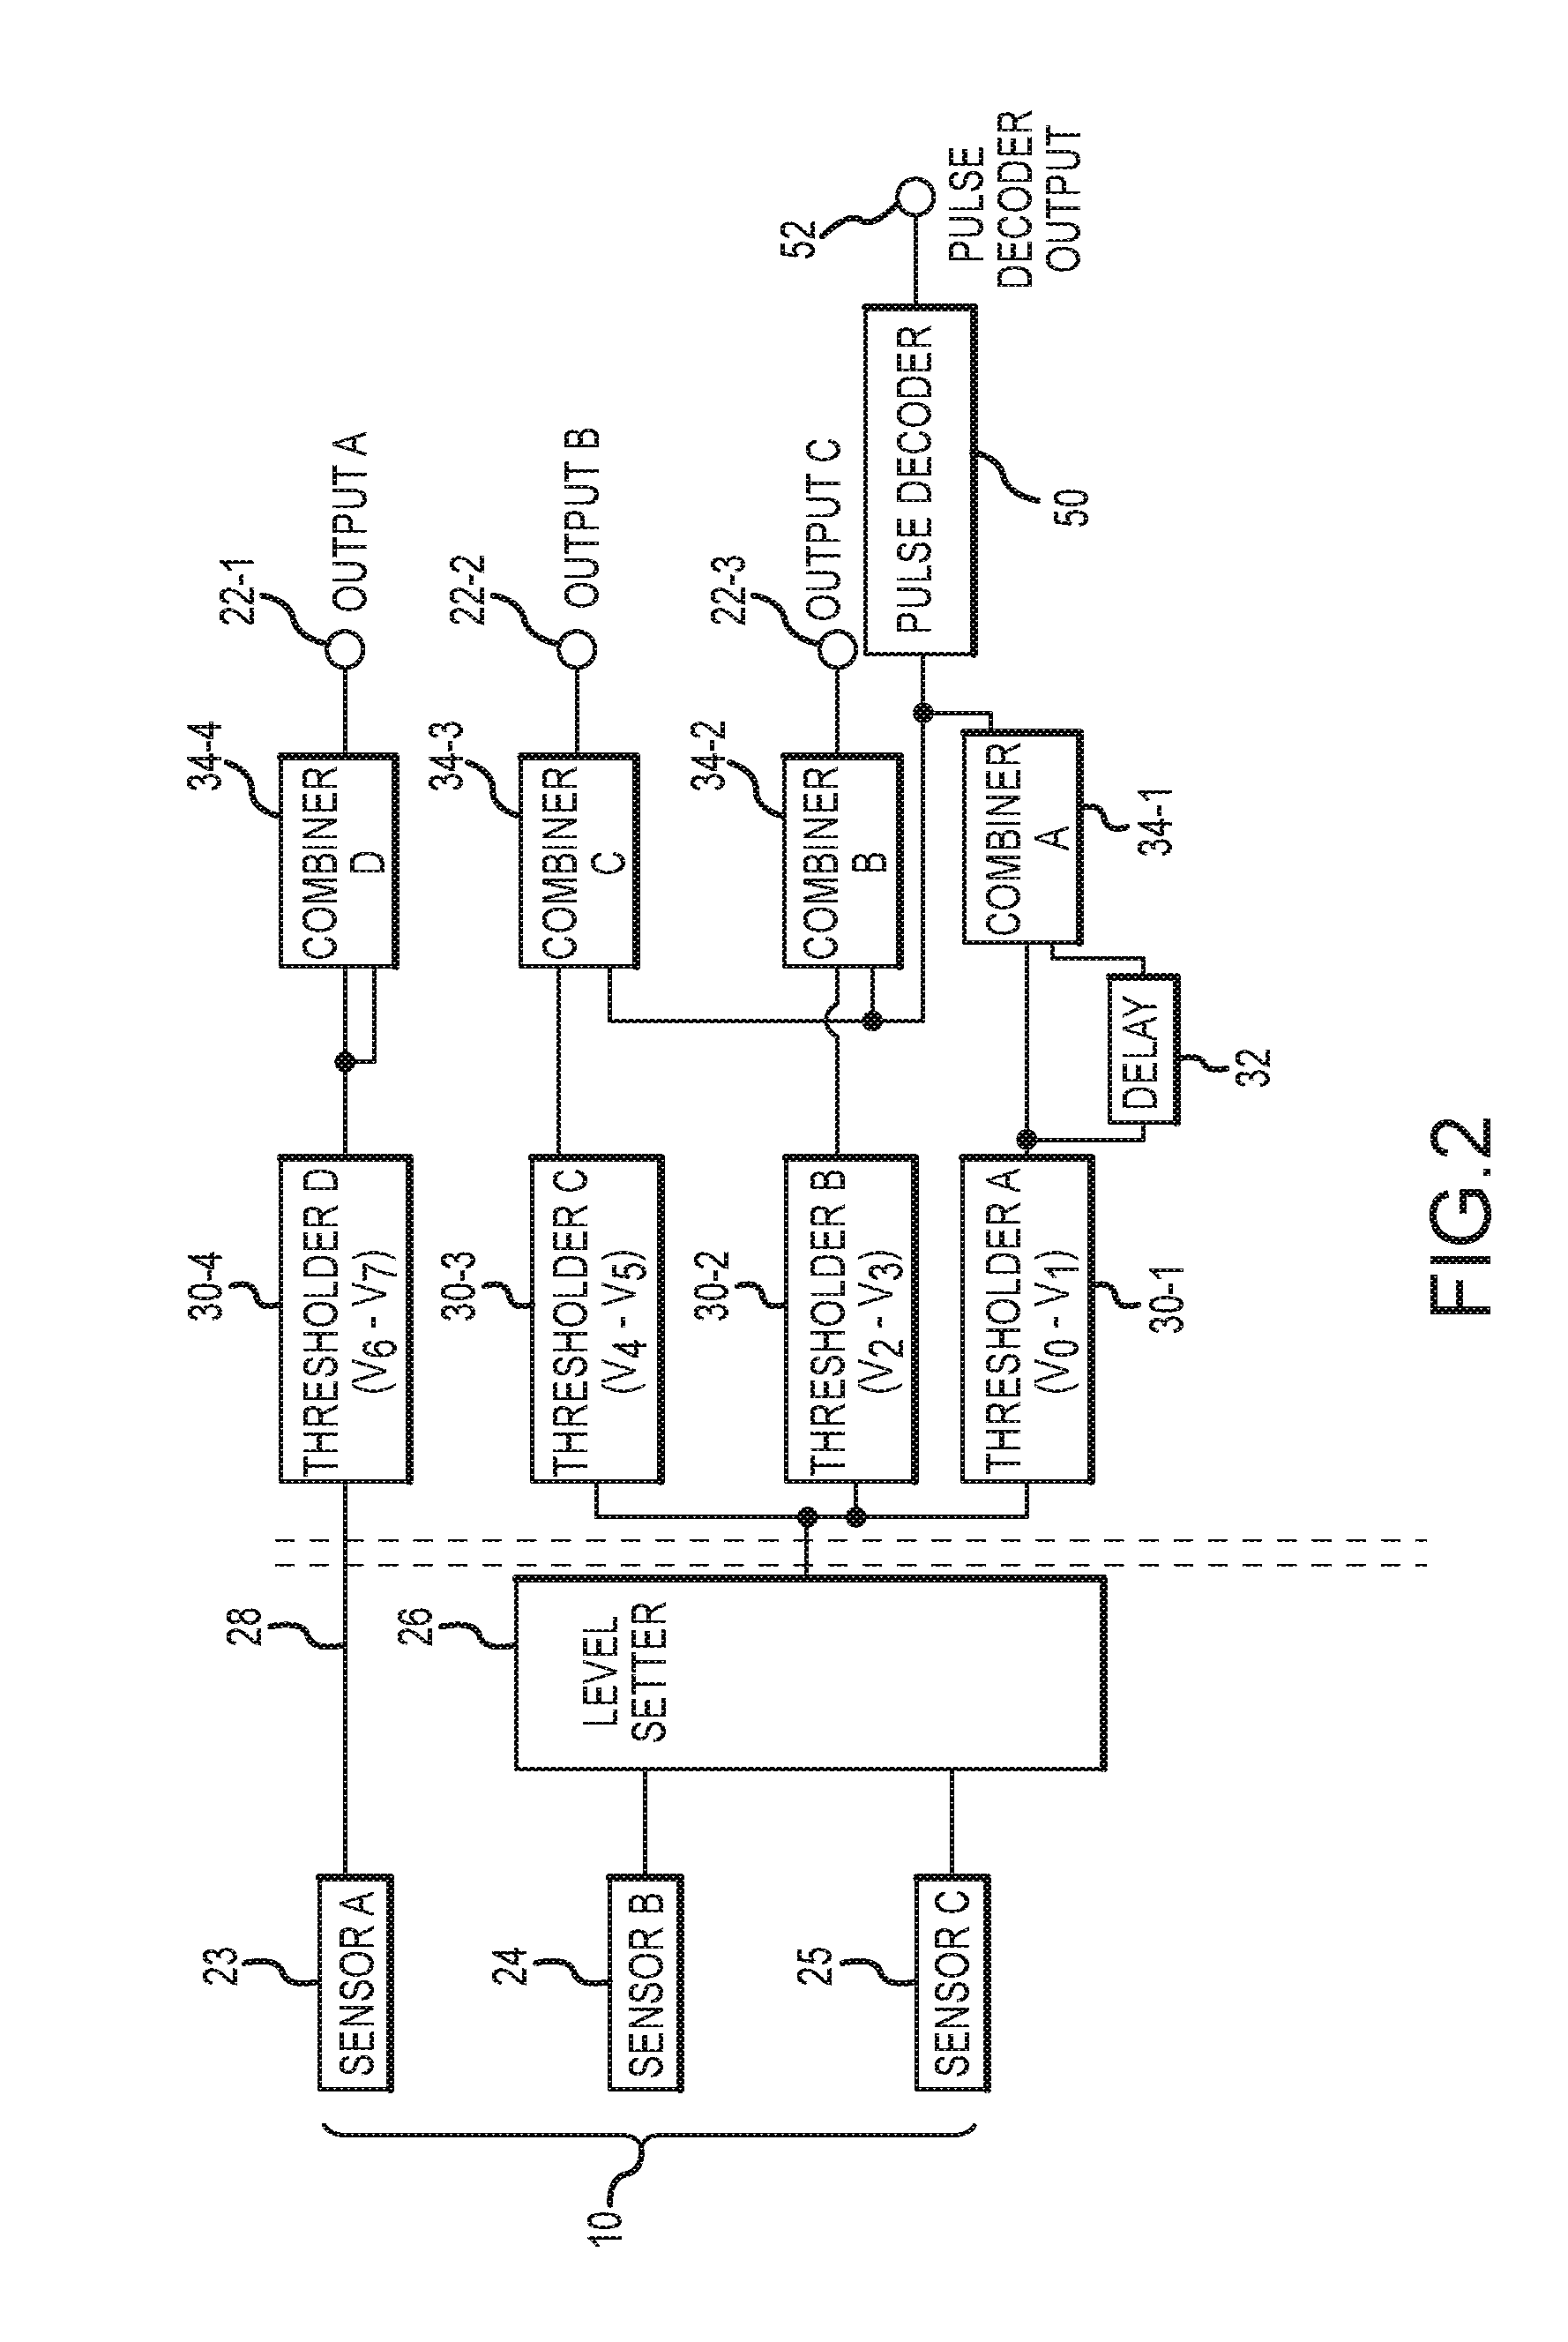 Sensor wire count reduction system